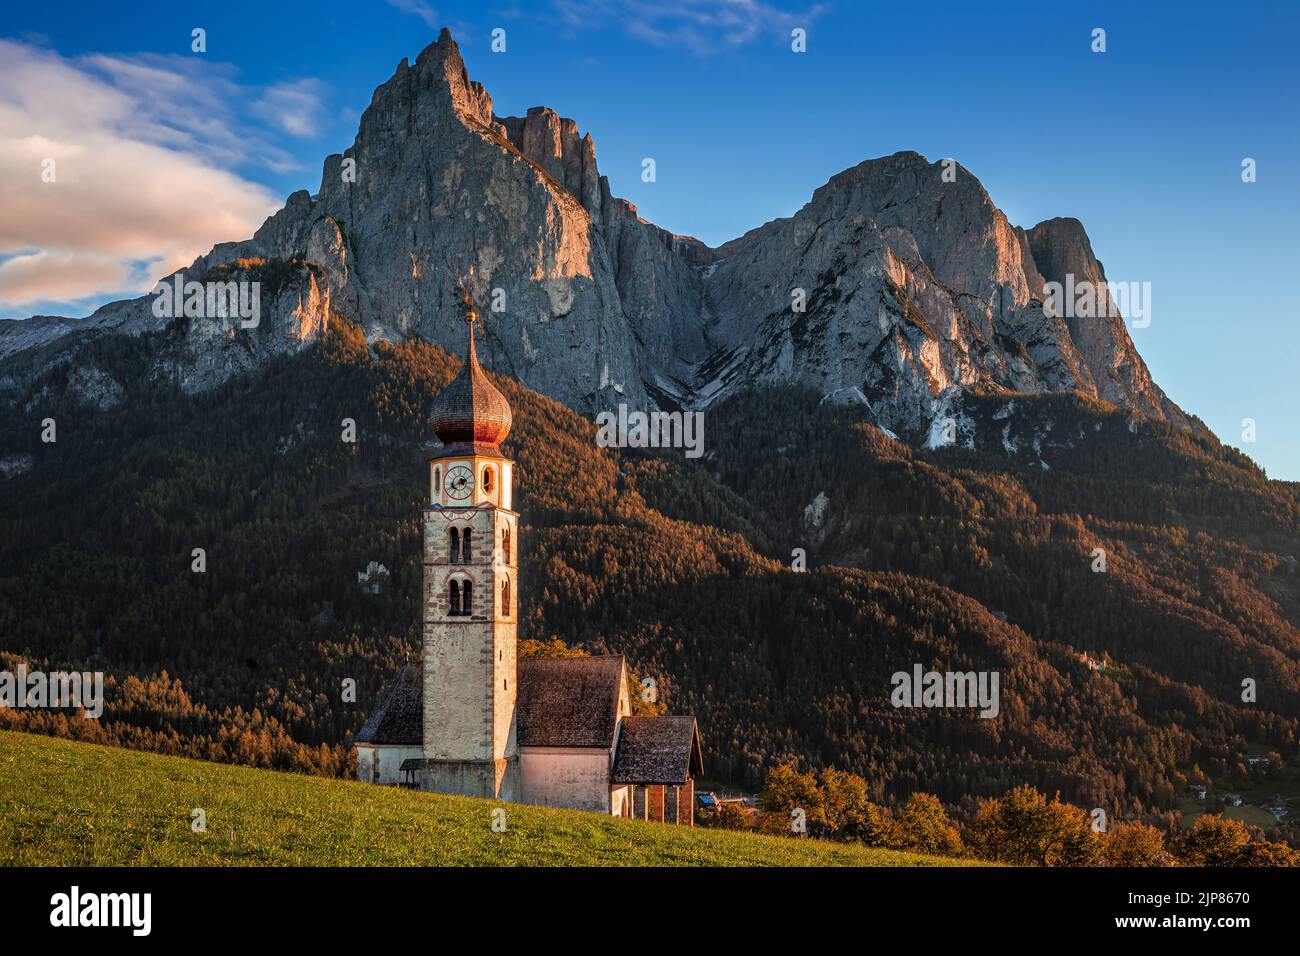 Seis am Schlern, Italy - The famous St. Valentin Church and Mount Sciliar mountain at sunset. Idyllic mountain scenery in the Italian Dolomites with b Stock Photo